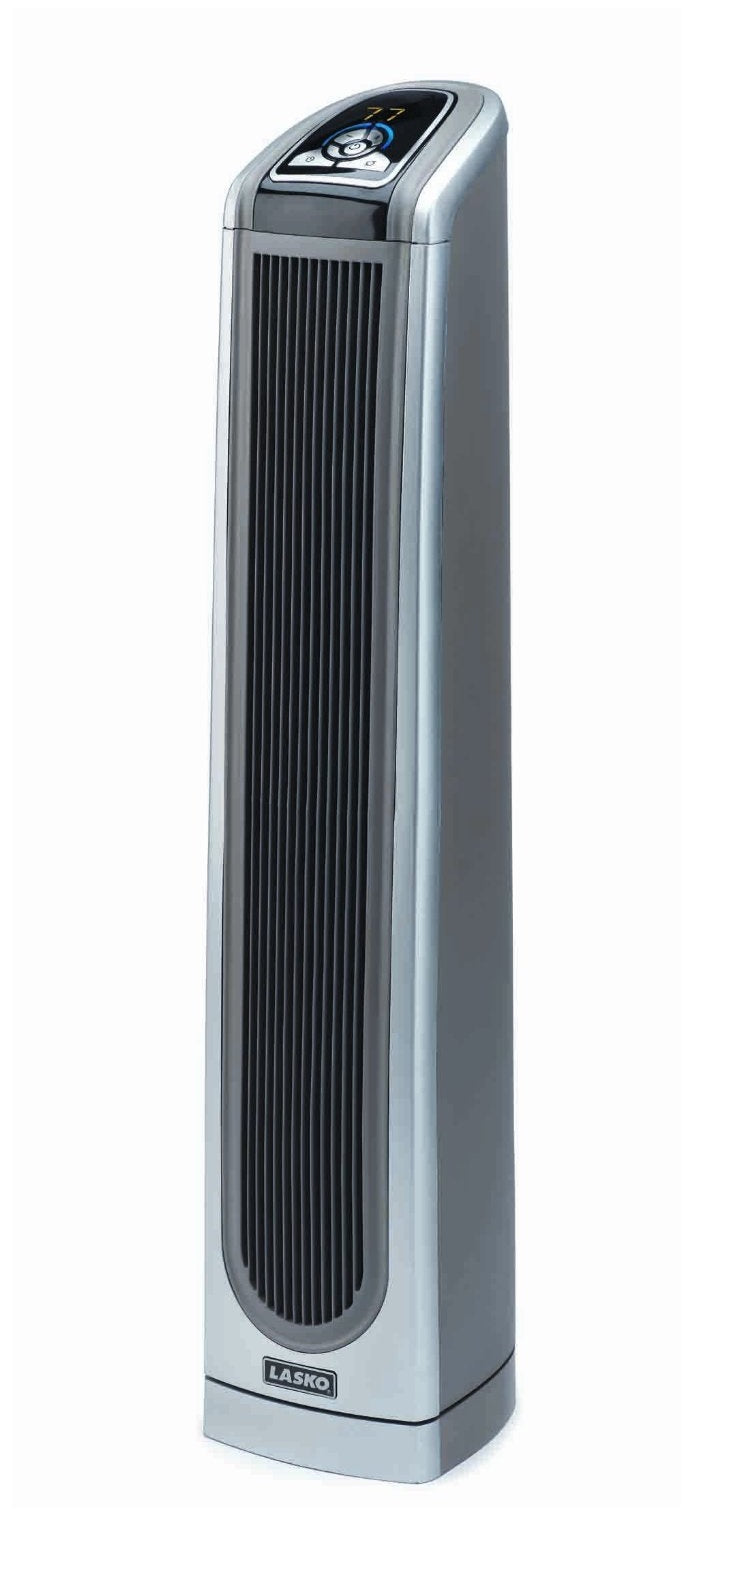 buy electric heaters at cheap rate in bulk. wholesale & retail heater & cooler repair parts store.